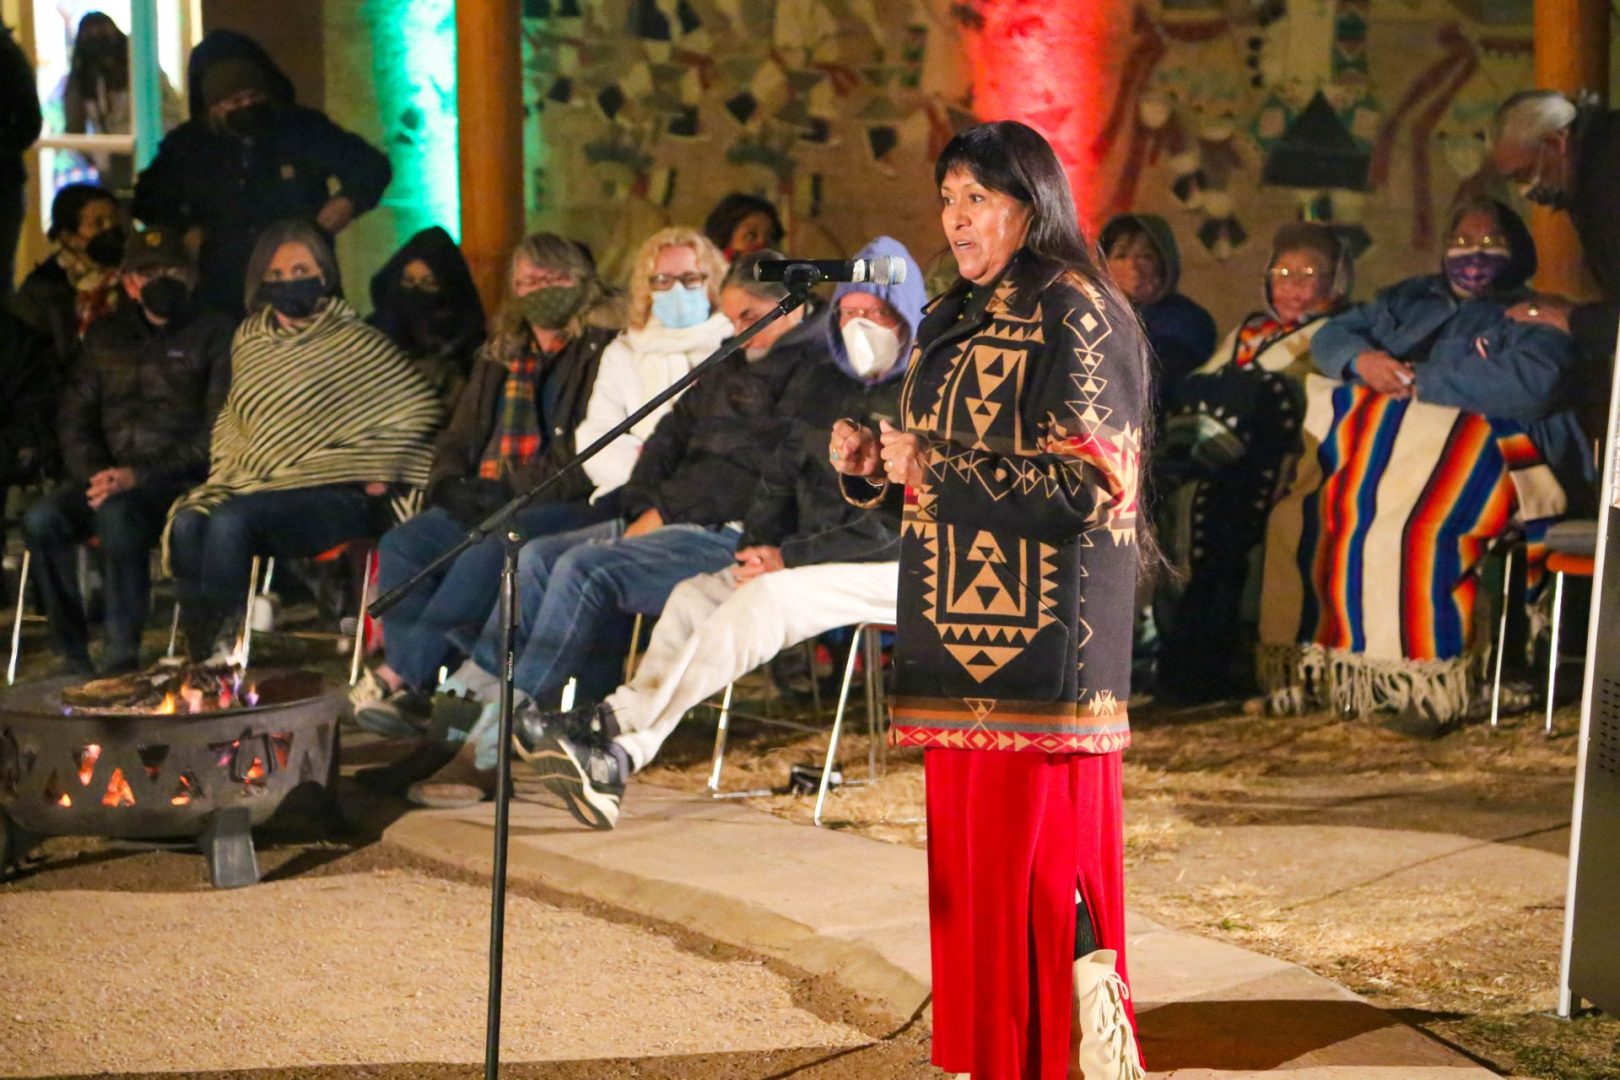 Stories by the fireside at the Indian Pueblo Cultural Center storytelling